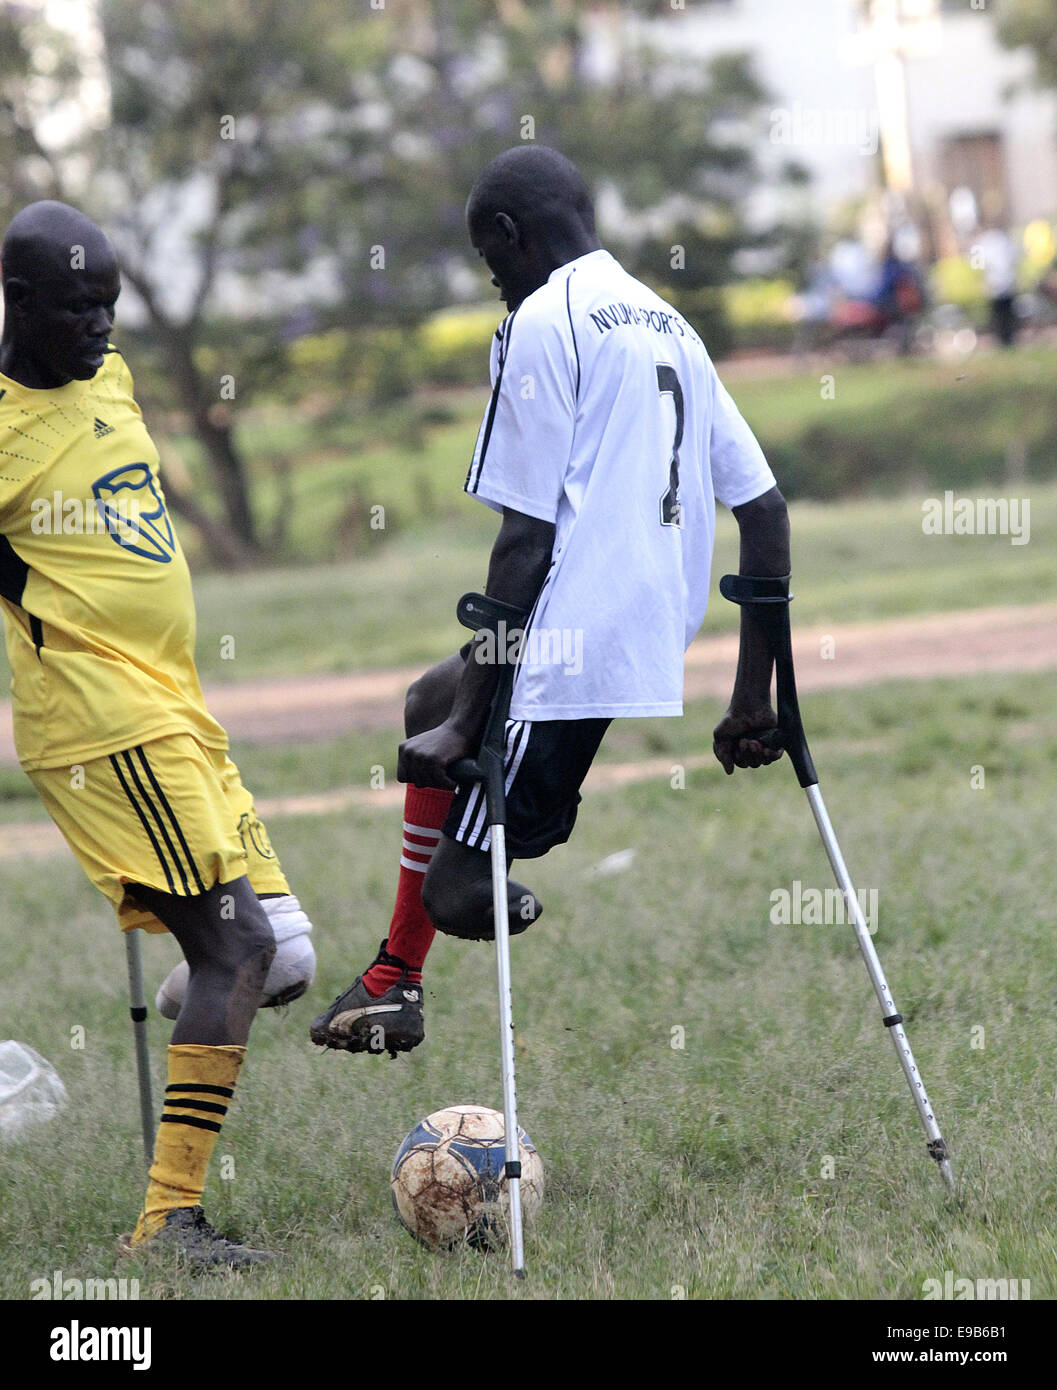 Kampala, Uganda. October 23rd, 2014. Ugandan amputees and disabled people take to soccer during the National Disabled Sports Gala at Kyambogo University sports ground. Disabled sport provides entertainment and recreation especially to former Ugandan soldier who lost some their limbs during the war between the Ugandan government and Joseph Kony led Lord’s Resistance Army (LRA). Credit:  Samson Opus/Alamy Live News Stock Photo